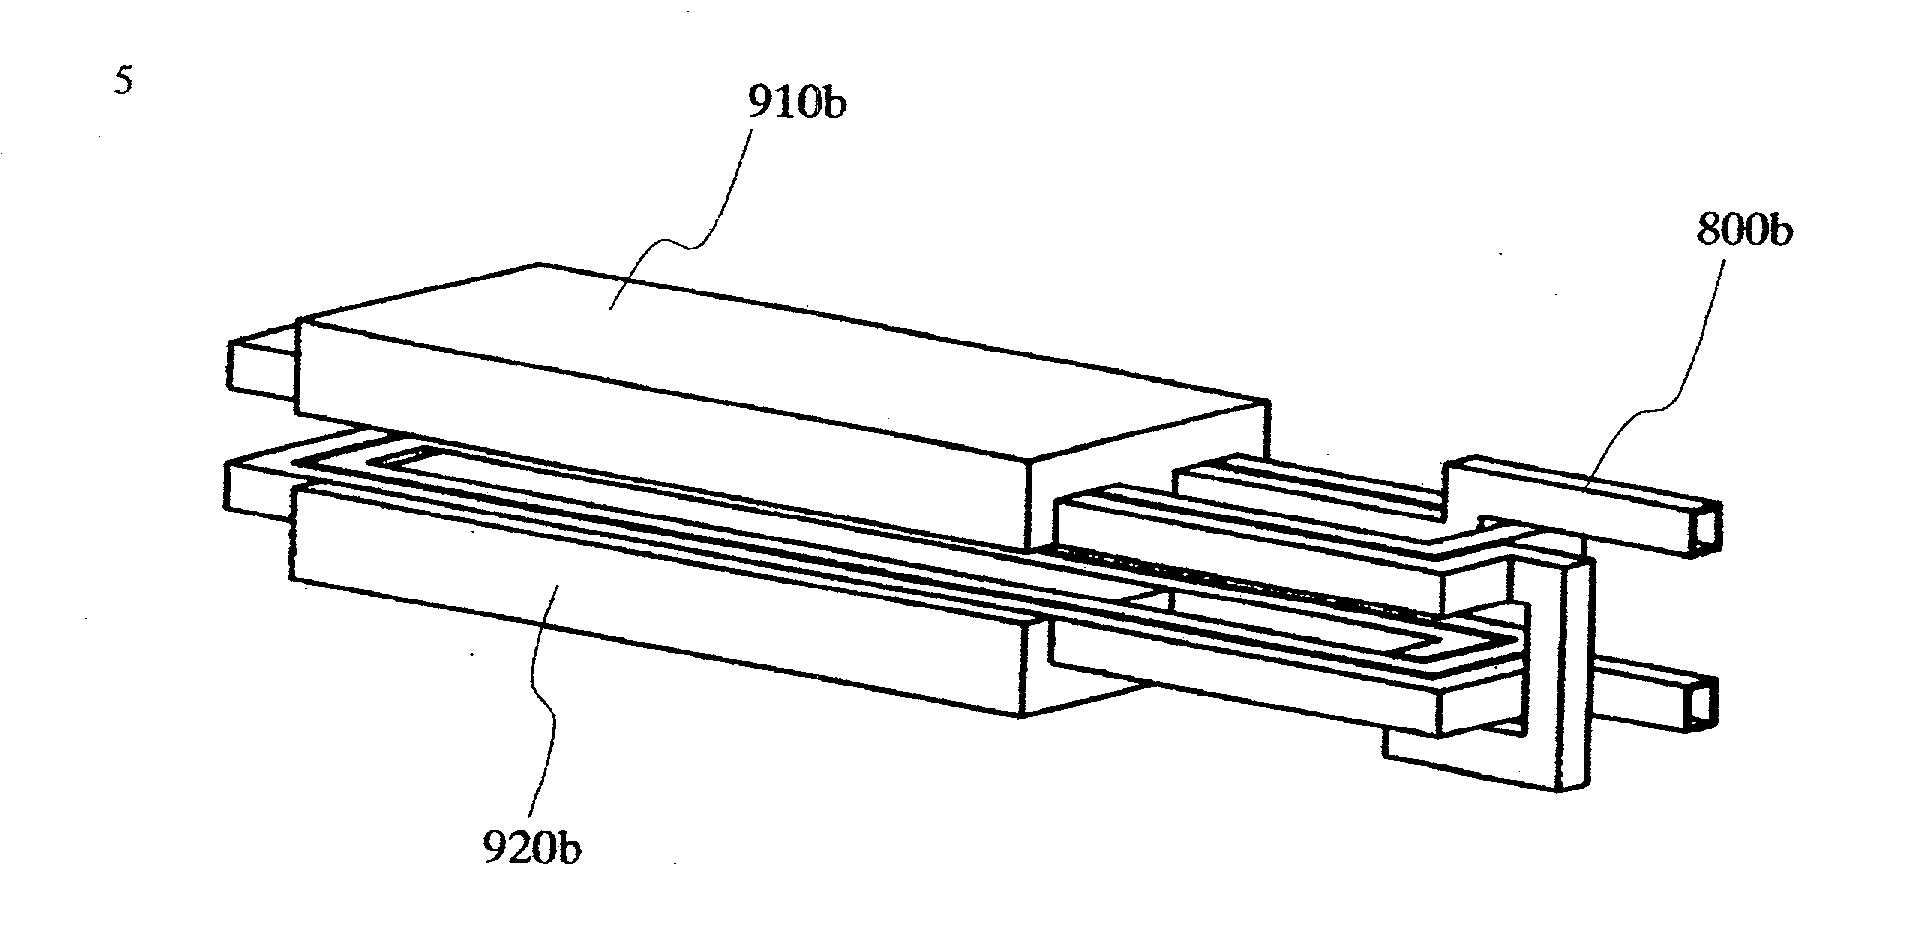 Apparatuses for heat-treatment of semiconductor films under low temperature